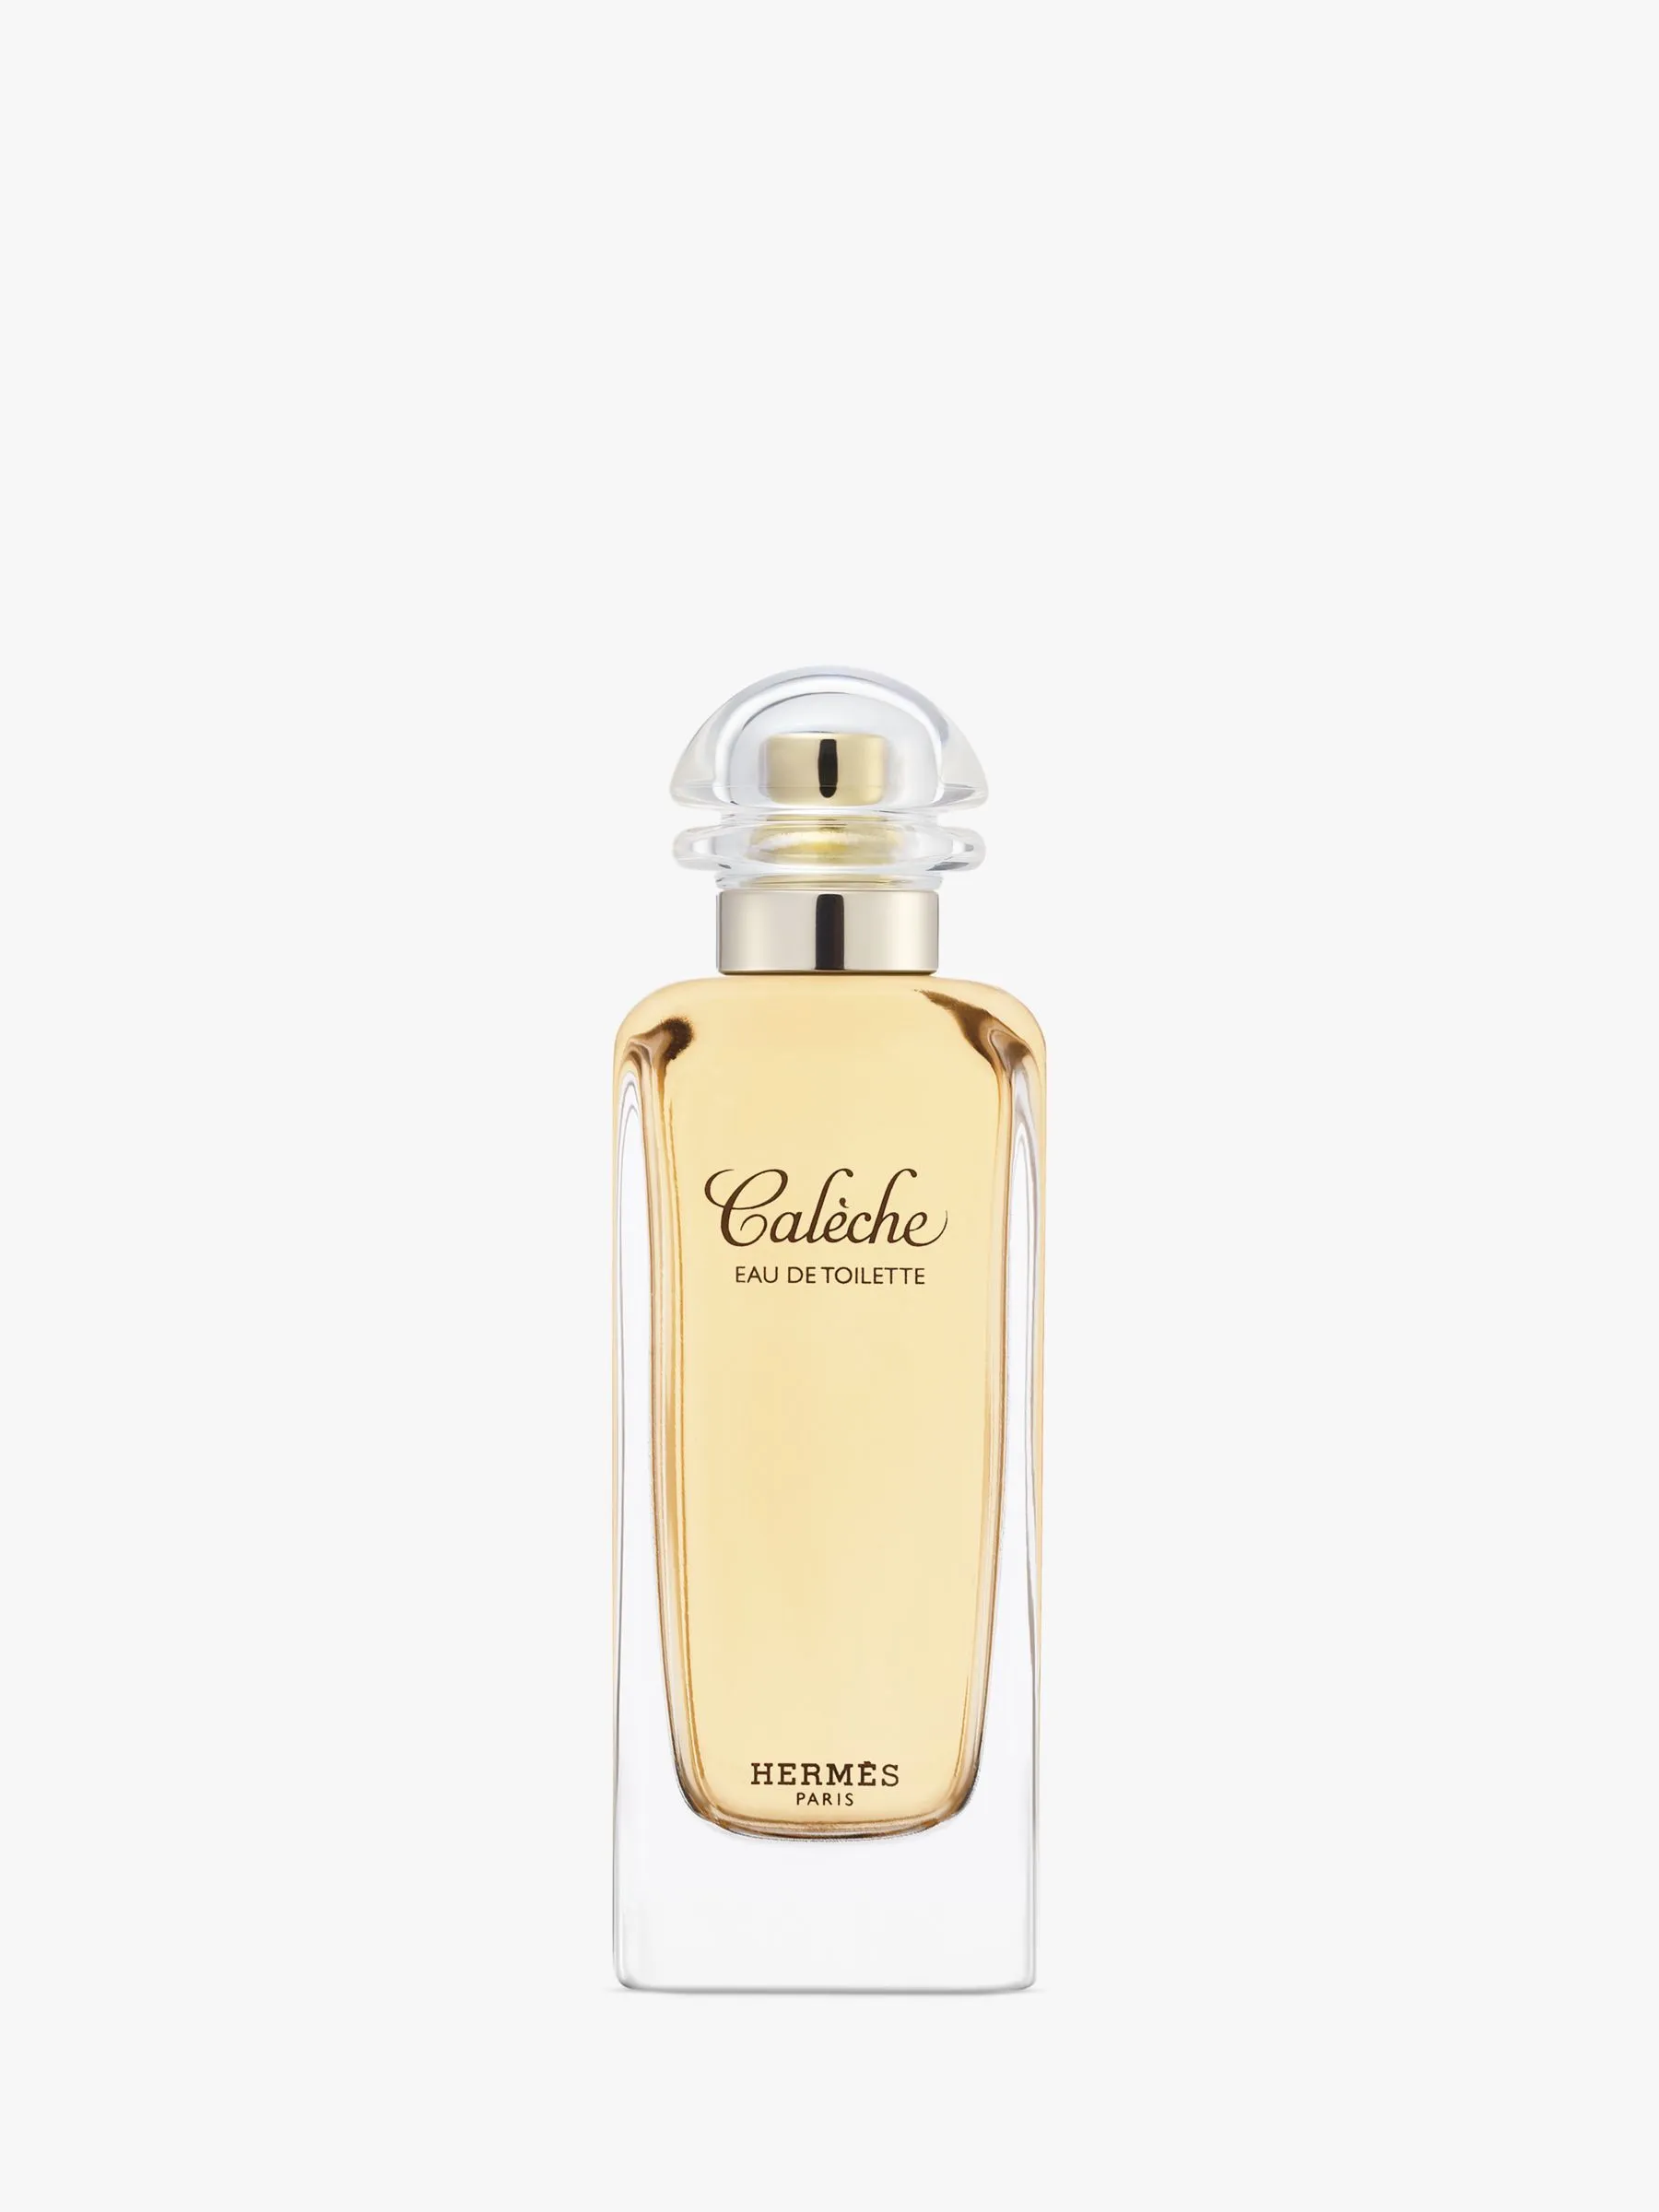 Caleche Eau De Toilette by Hermes, one of the best French perfumes.